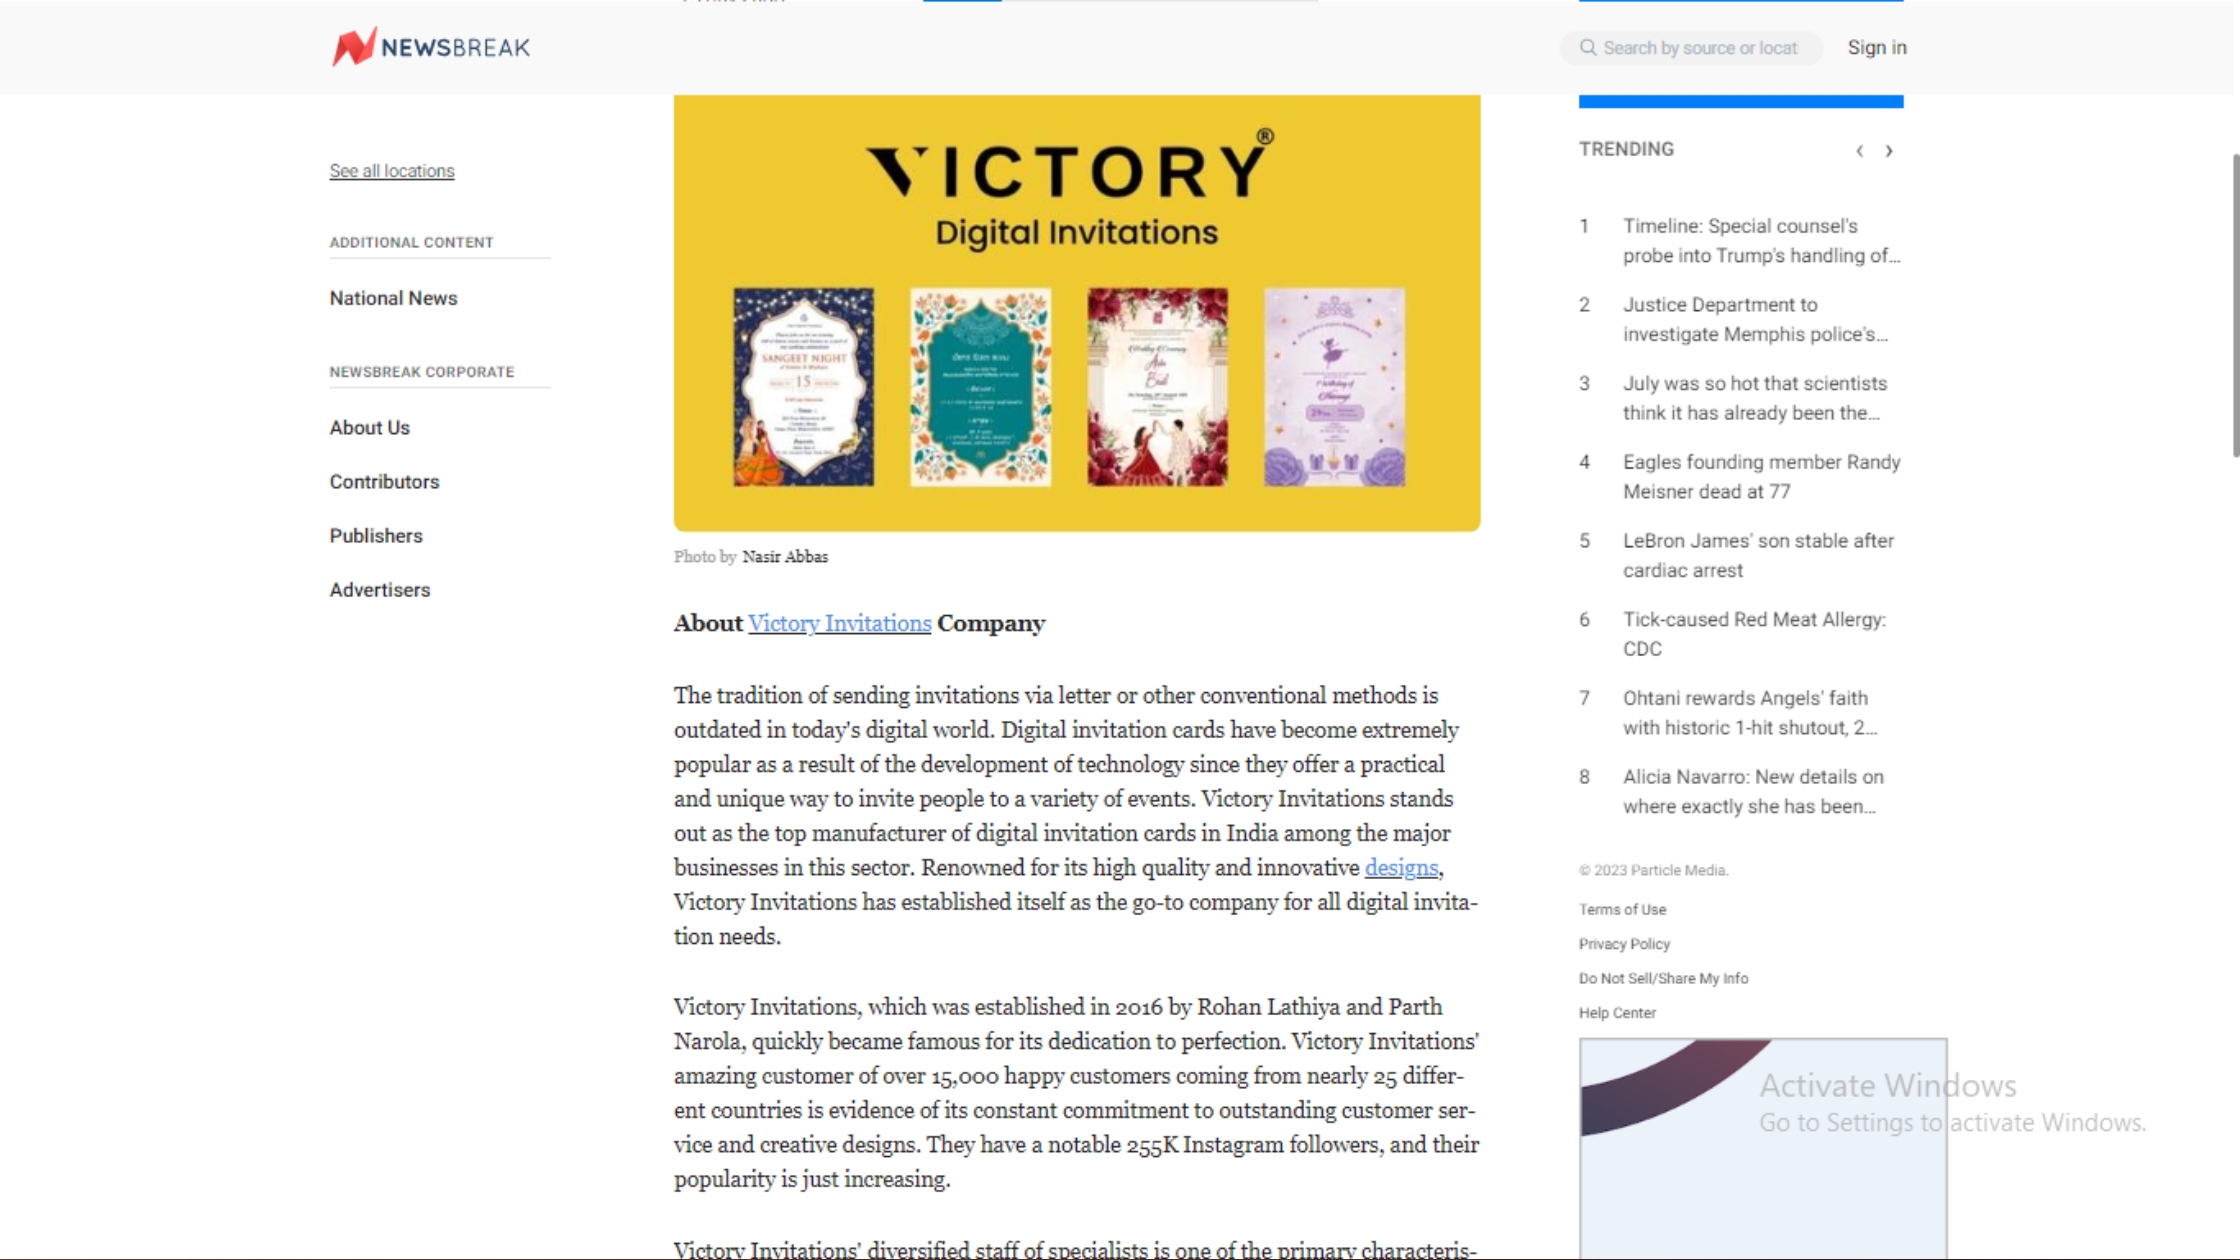 We are honored to share that Newsbreak recently highlighted our company, Victory Invitations